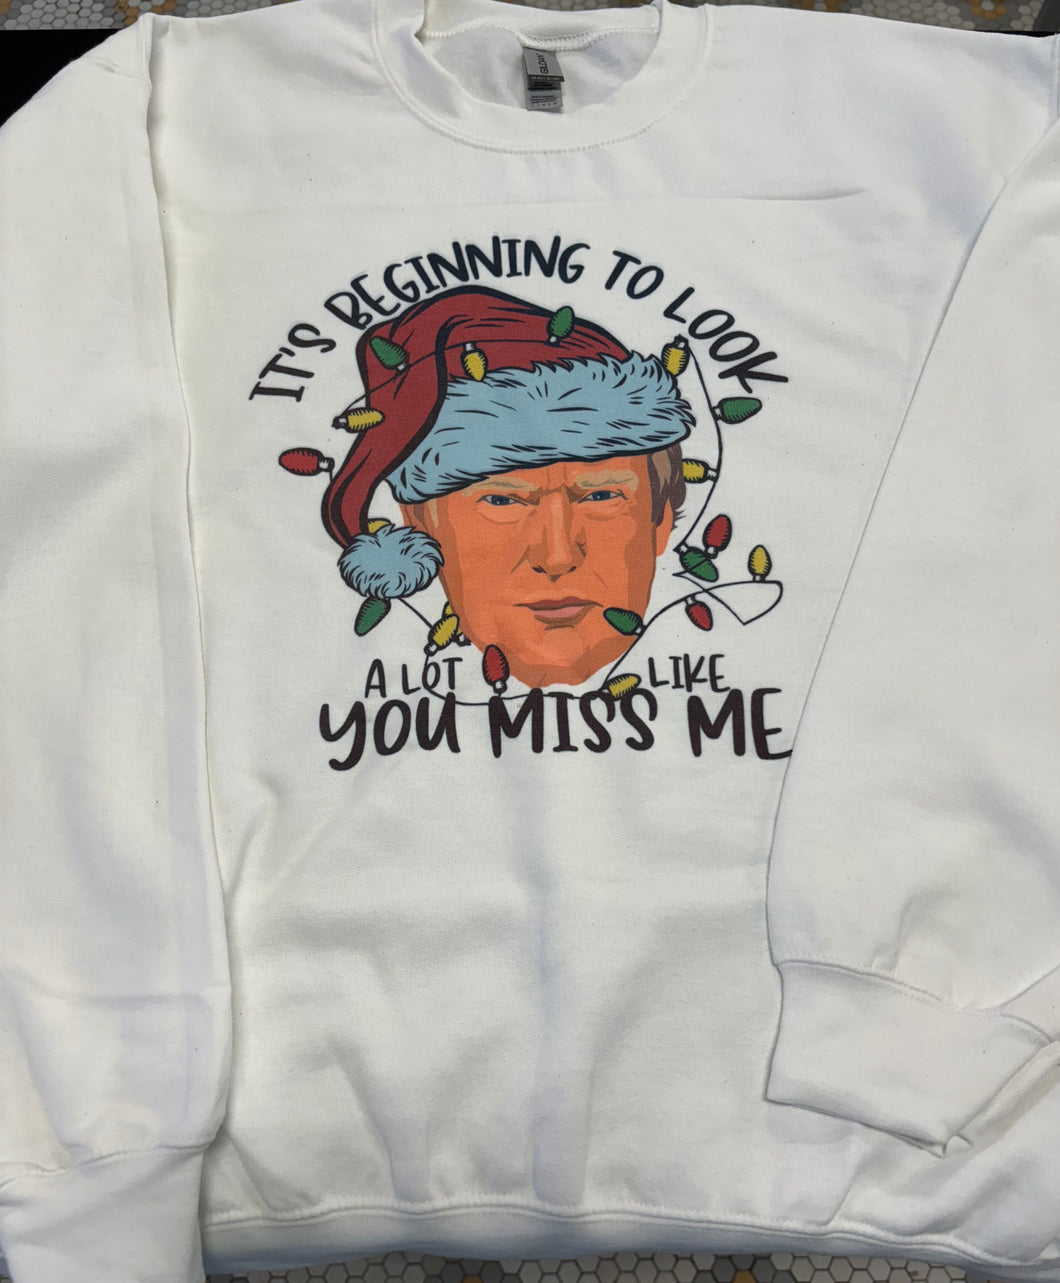 “It’s Beginning ToLook A Lot Like You Miss Me” Sweatshirt-Size Large